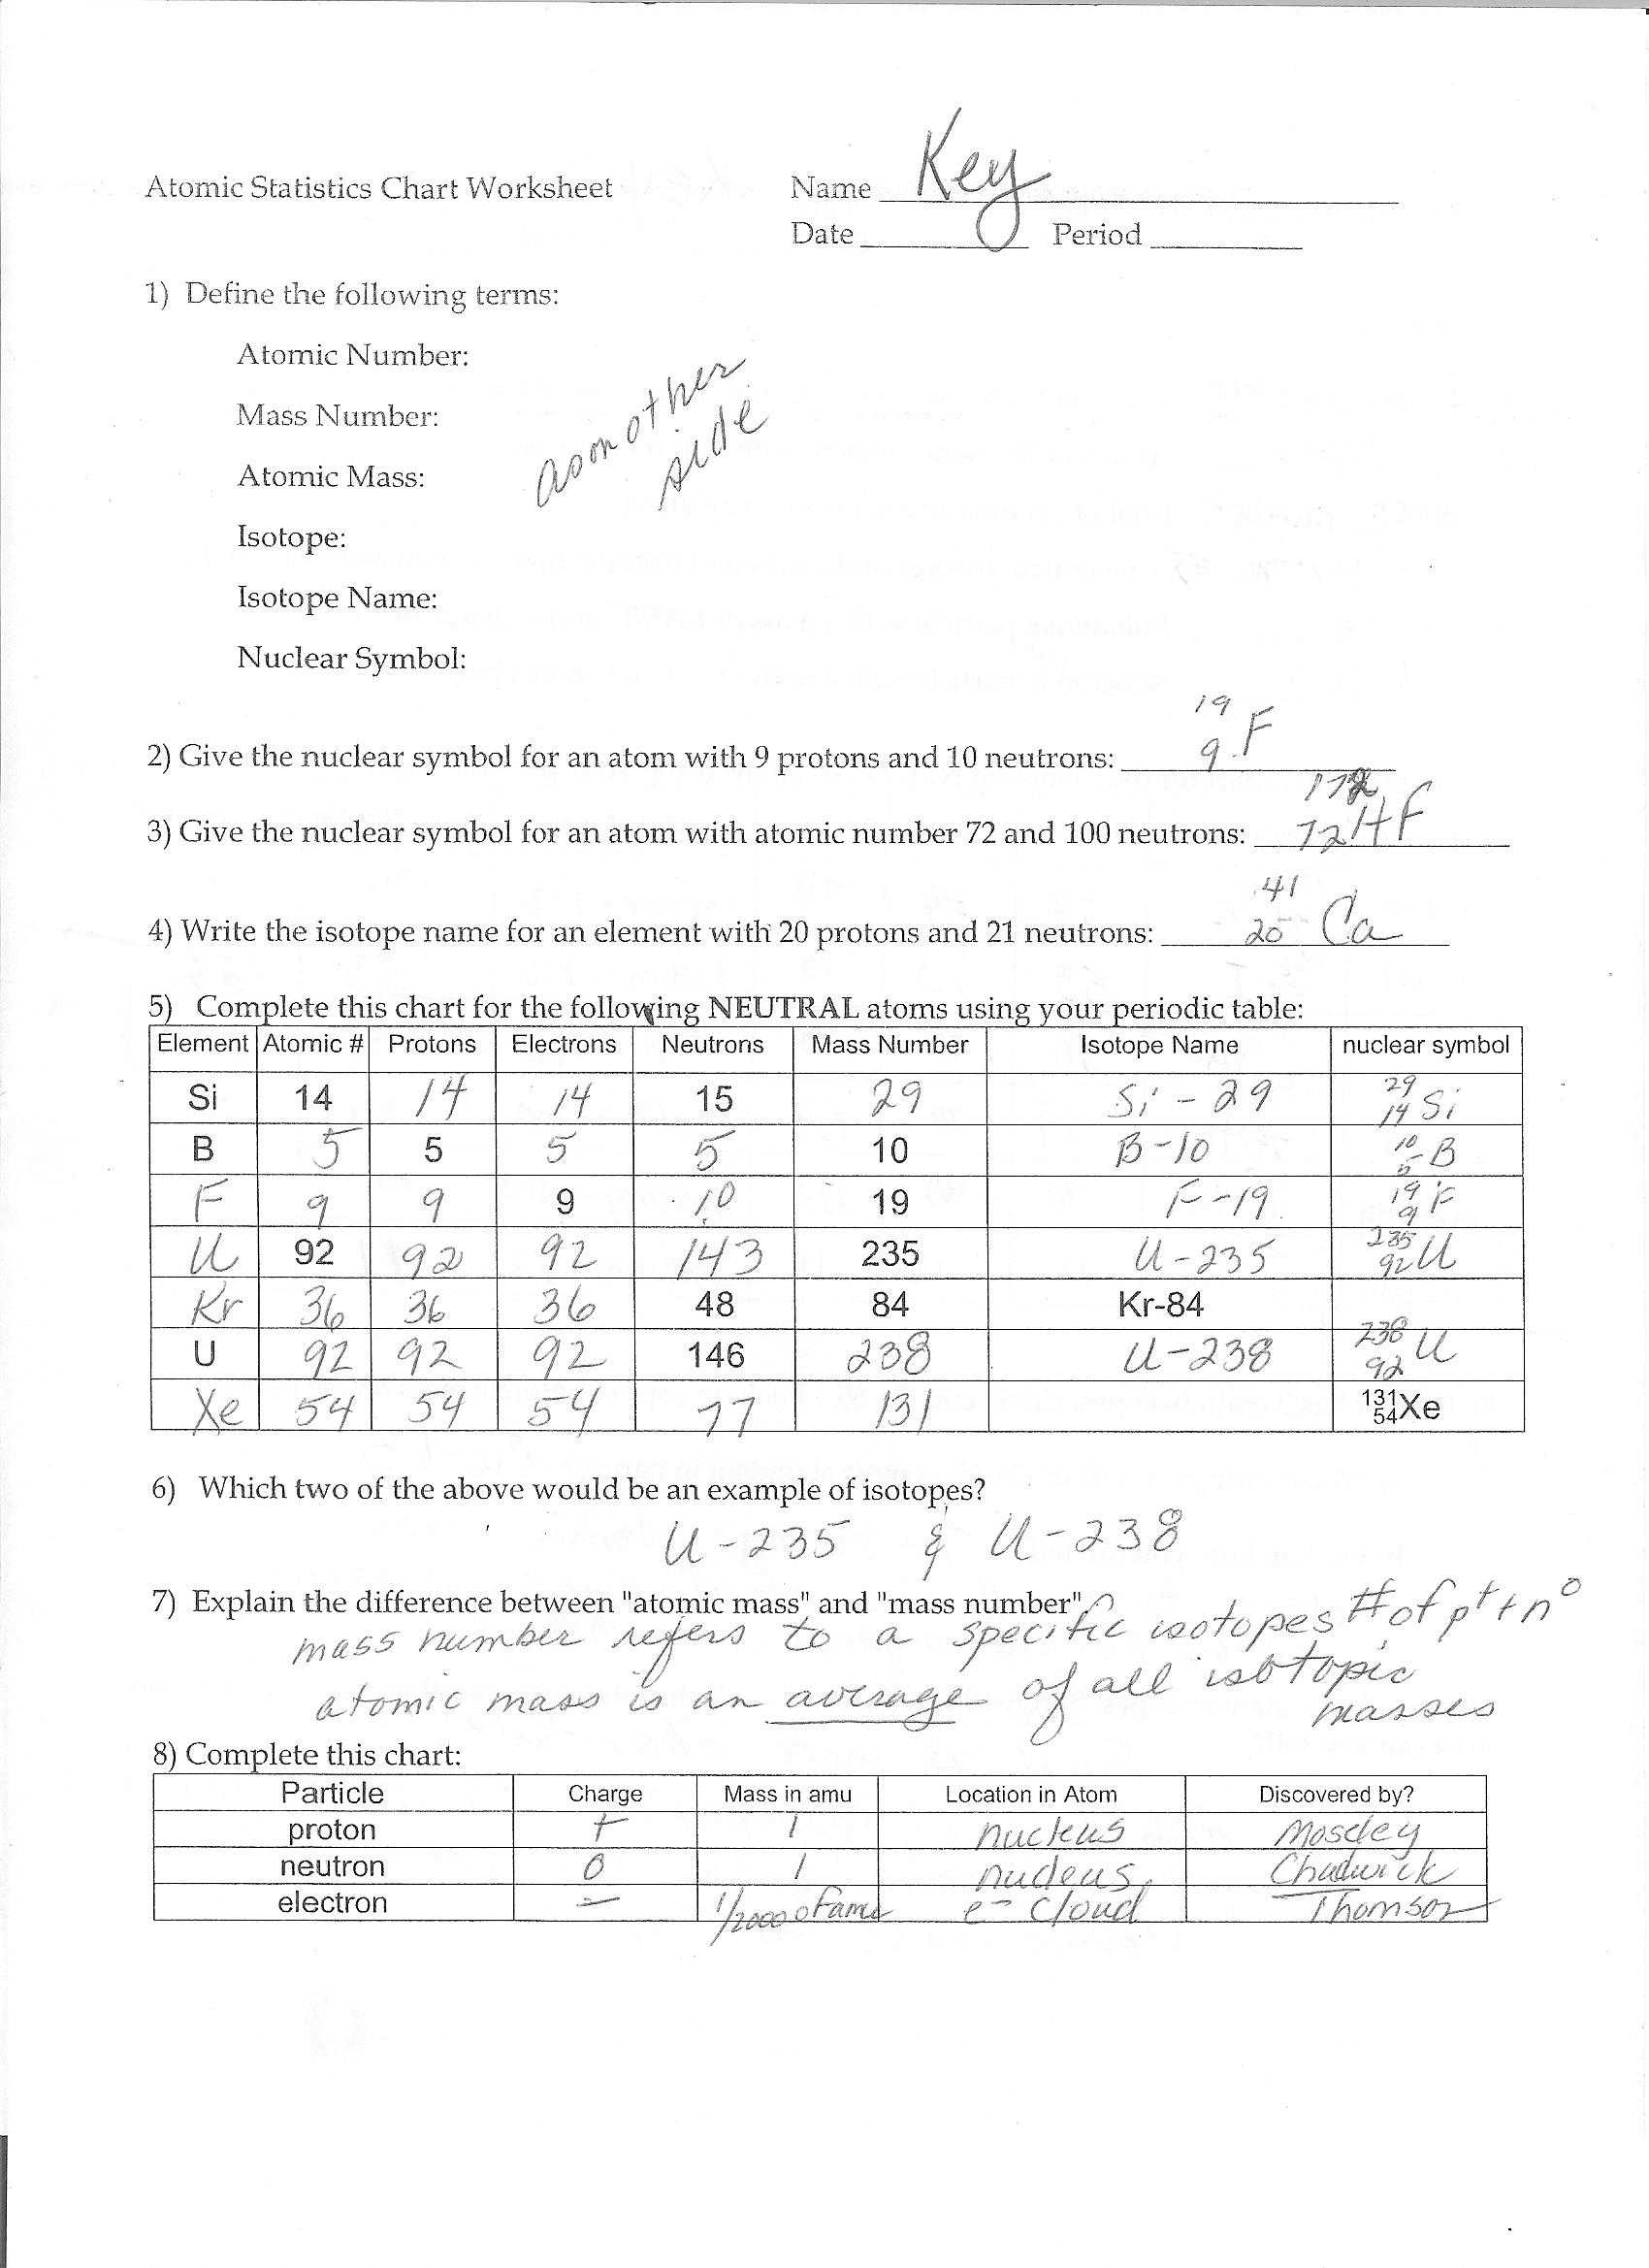 Worksheet 10 Metallic Bonds Answers together with Periodic Table Trends Worksheet Best Periodic Table Activity Lab